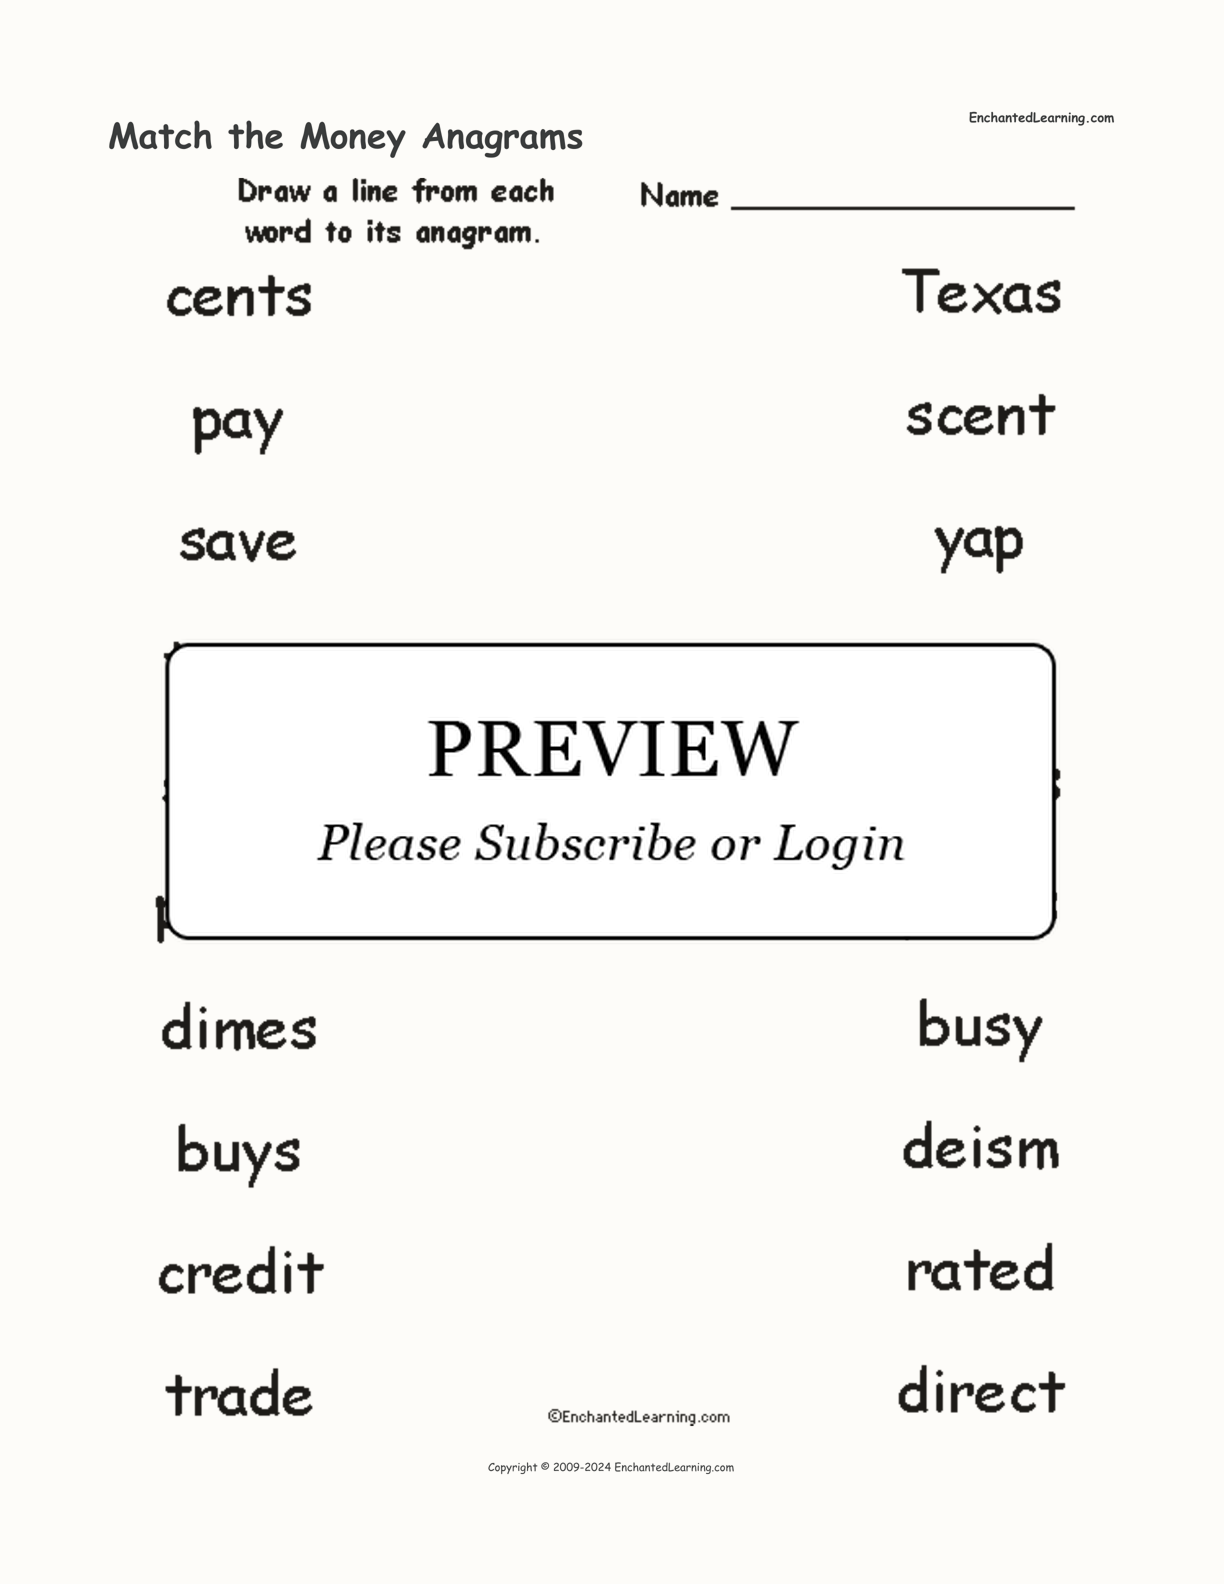 Match the Money Anagrams interactive worksheet page 1